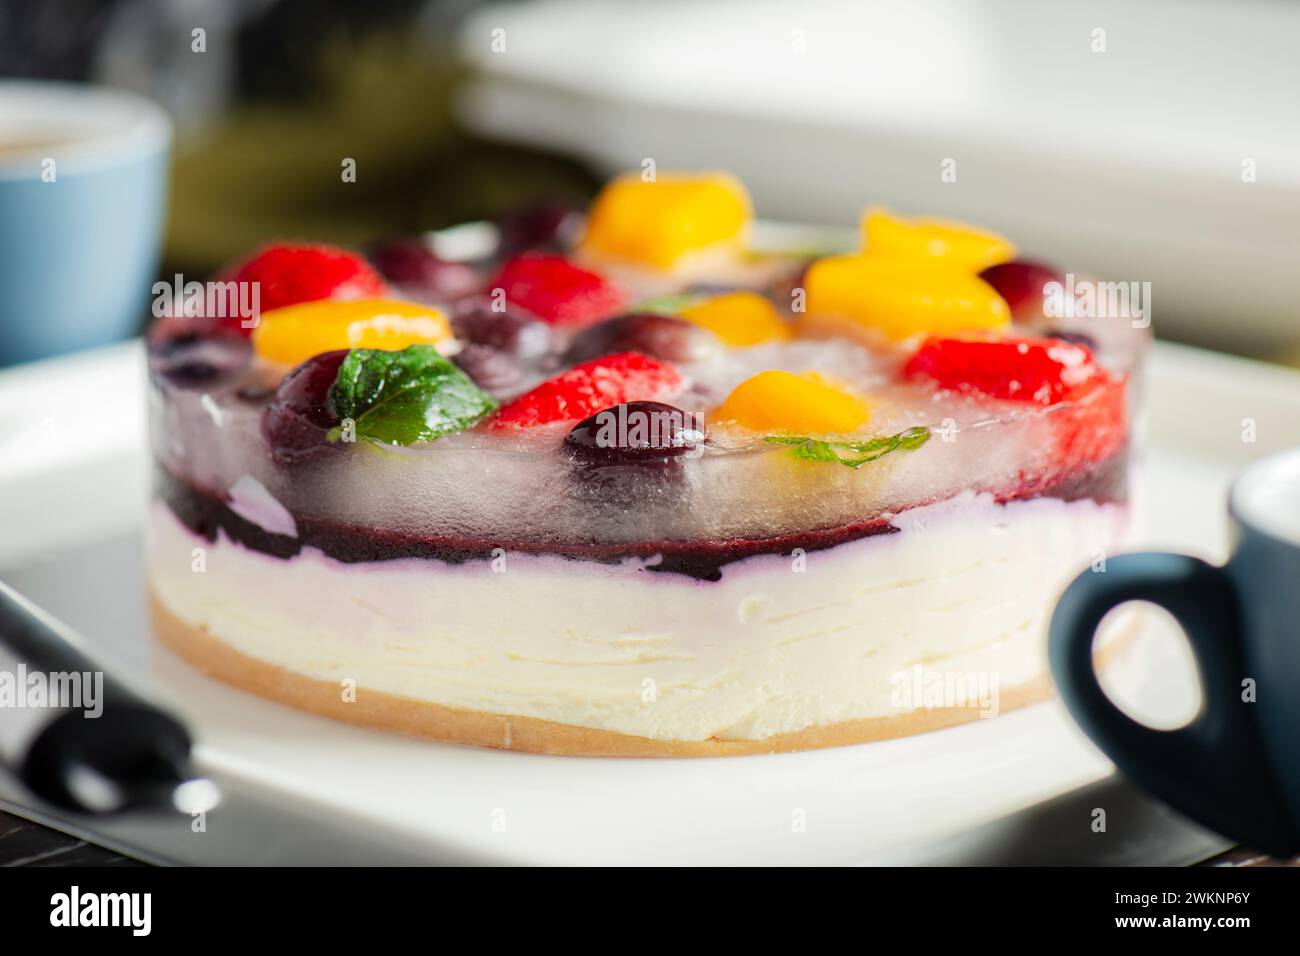 Delicious and light no-bake cheesecake with summer fruits including strawberry, mango, and grapes. Stock Photo